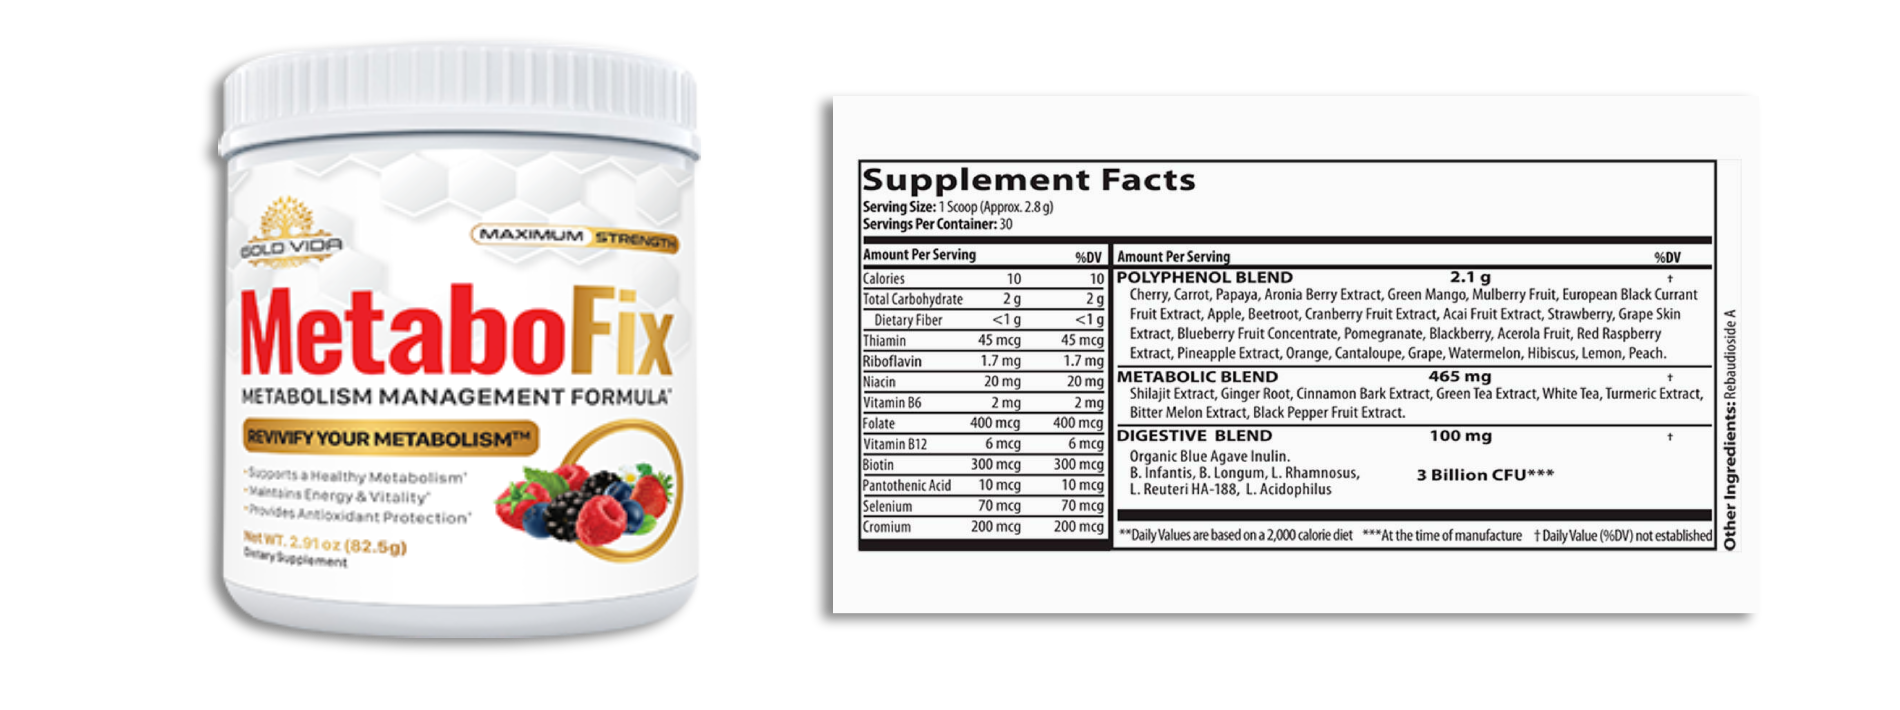 MetaboFix weight loss supplement Facts